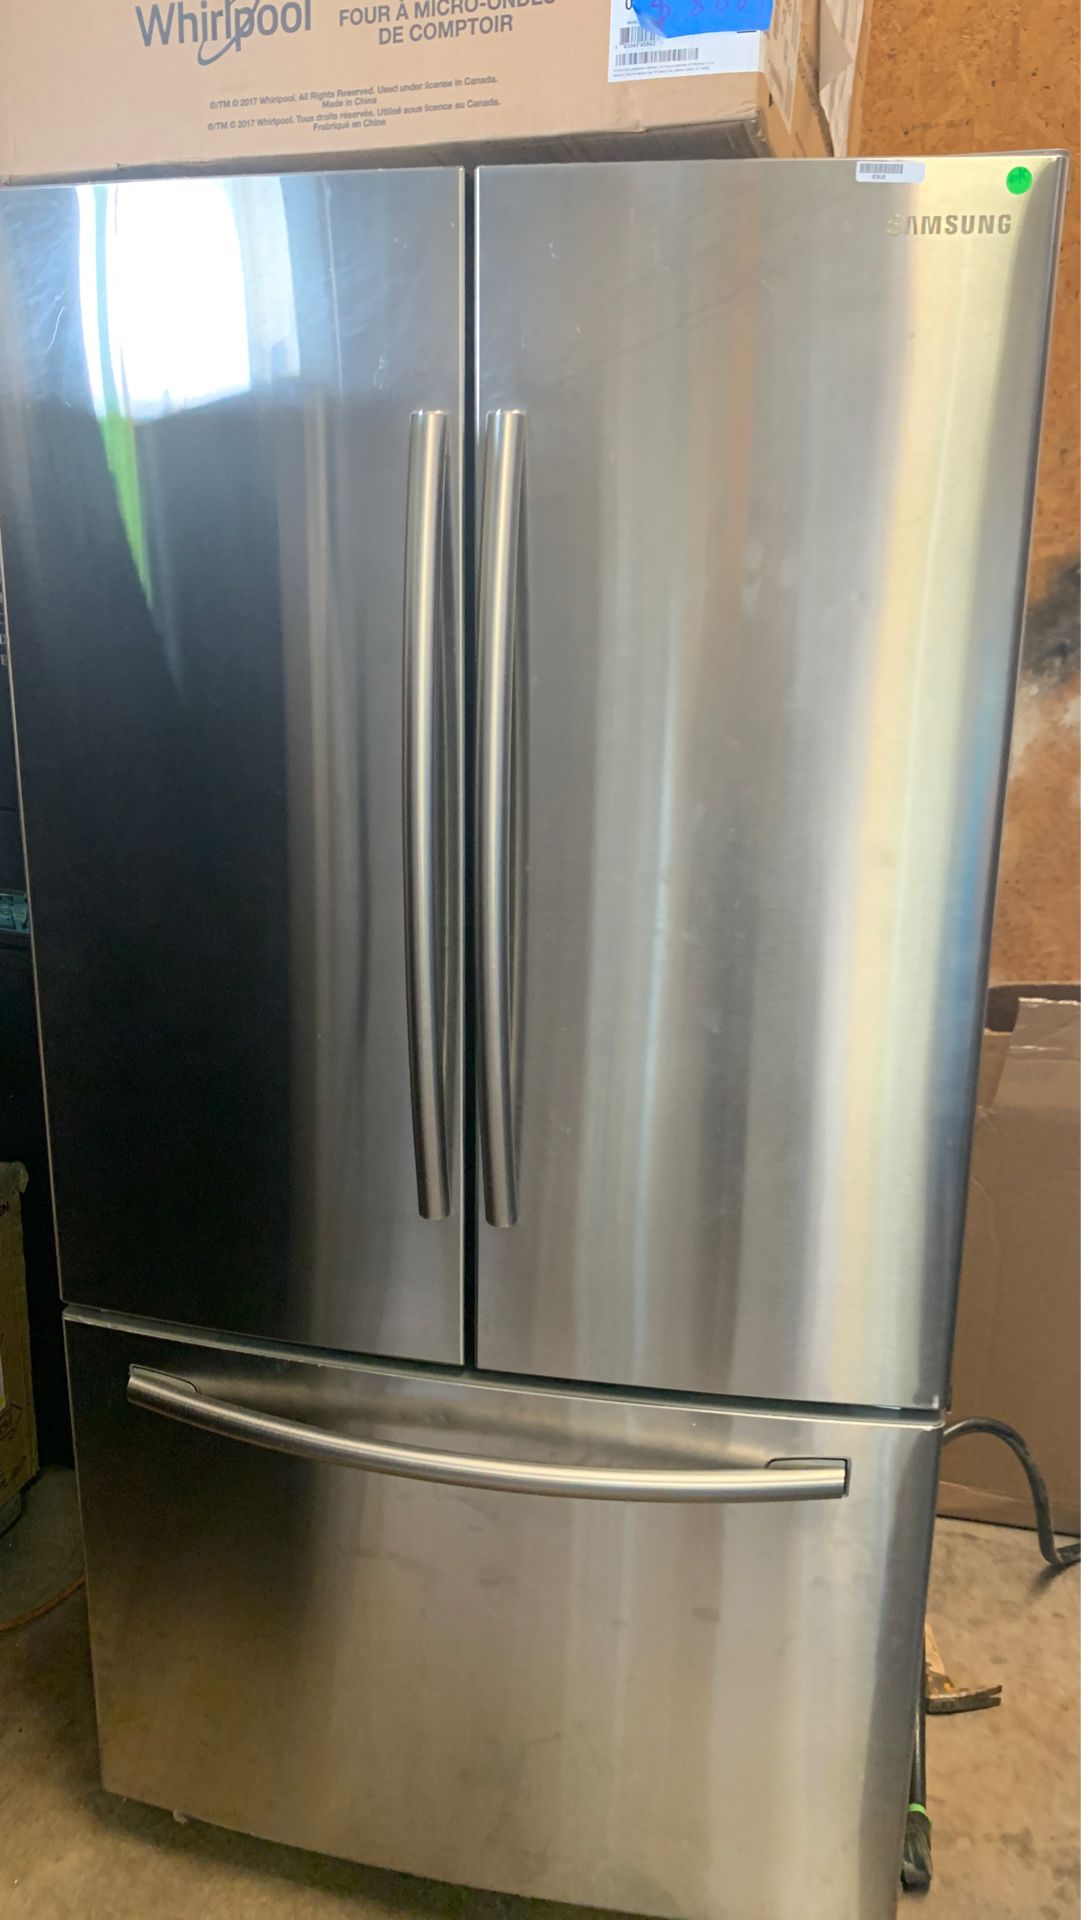 Used Samsung French door refrigerator with ice maker !!